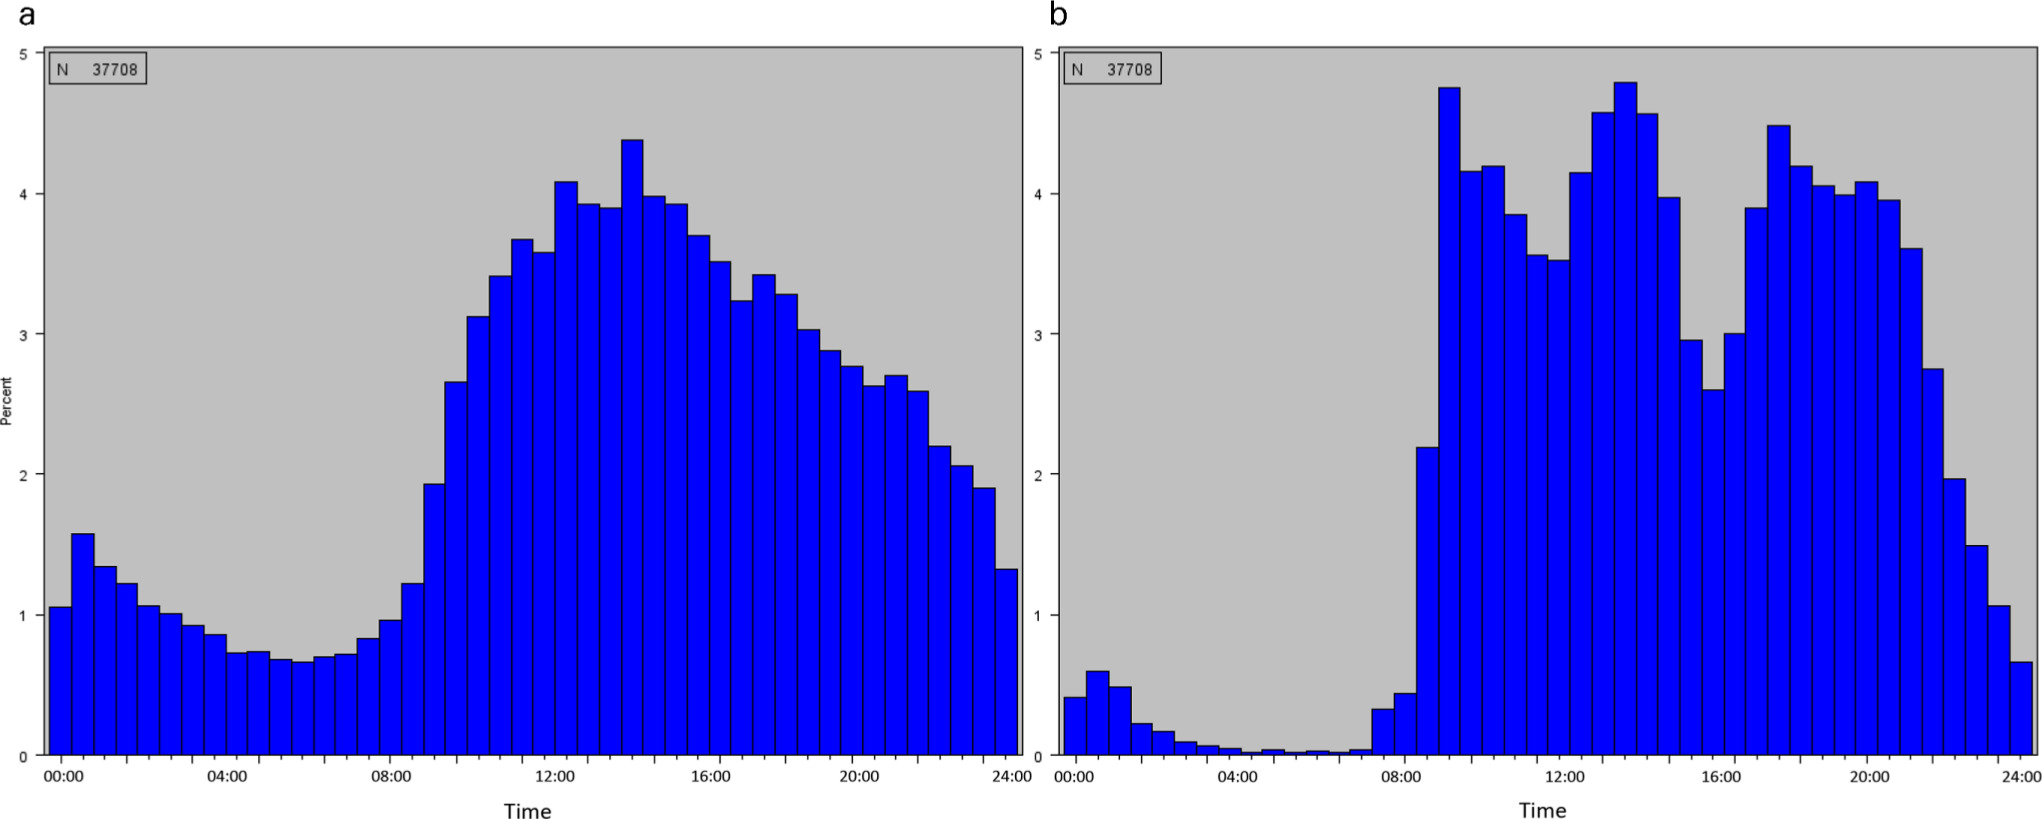 Fig. 2 
            Time of admission a) and time of surgery and b) for 37,708 patients.
          